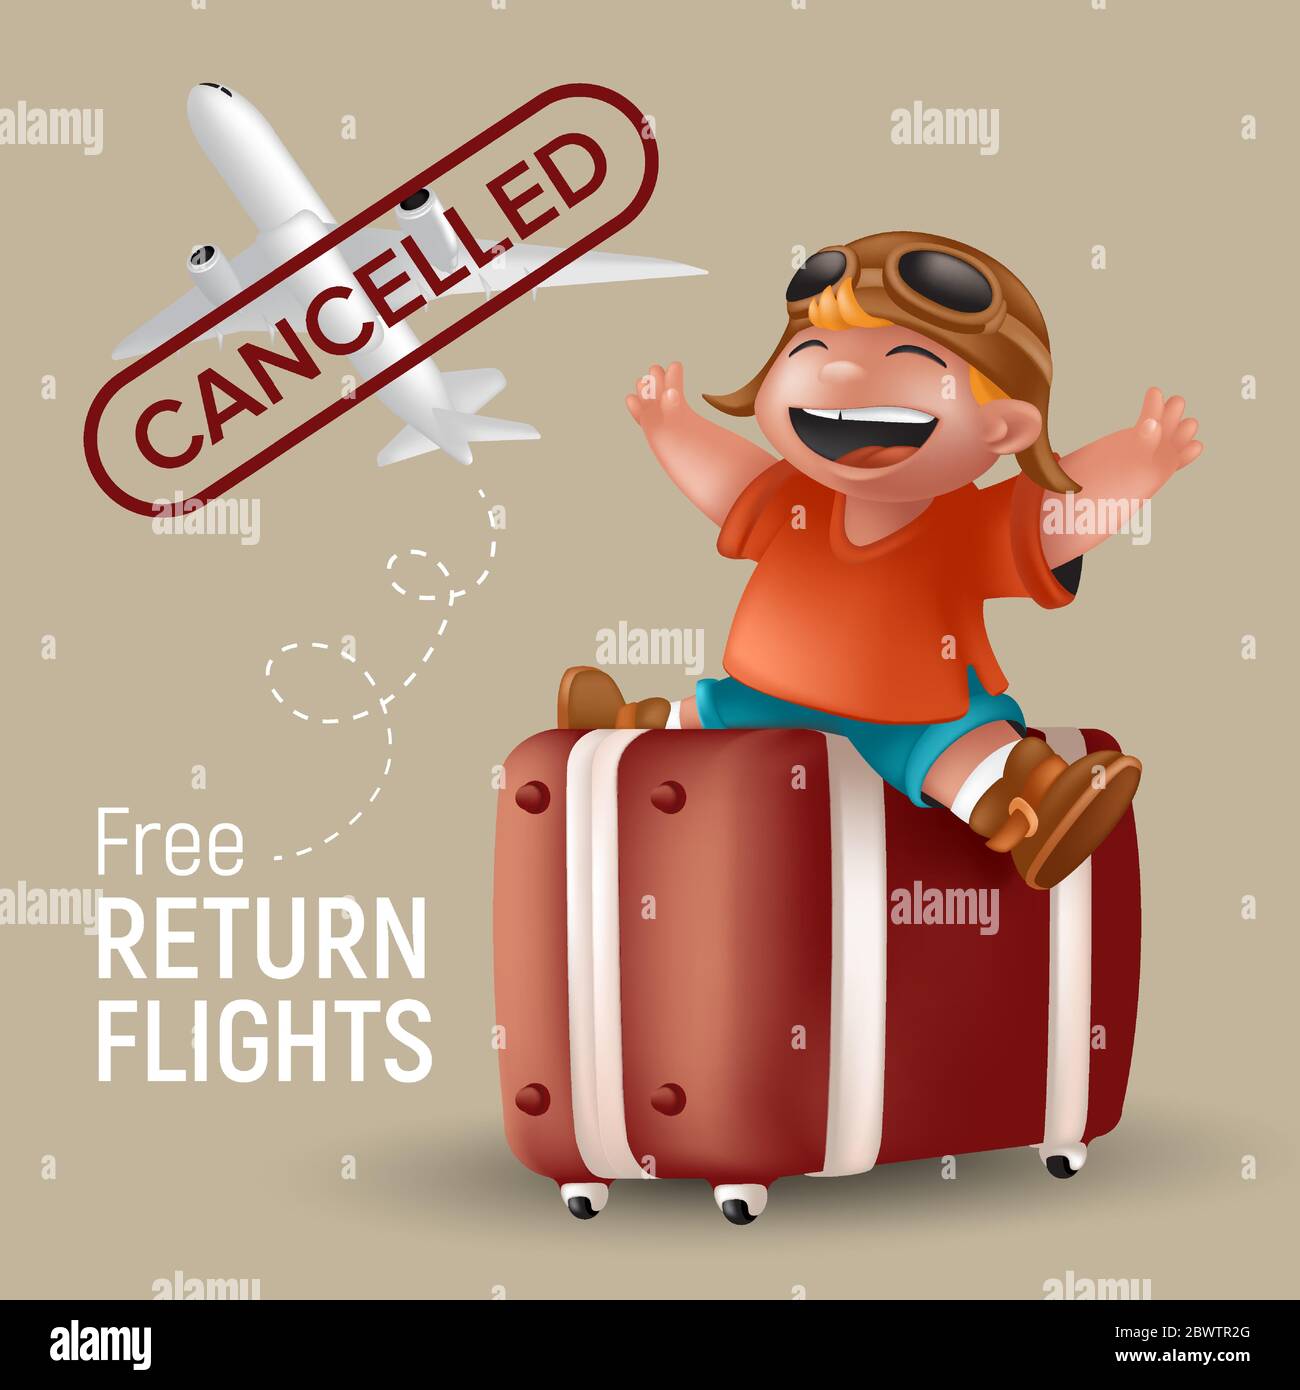 Free return flight vector illustration with airplane and cartoon little boy in orange tshirt and pilot glasses sitting with raising hands on brown sui Stock Vector